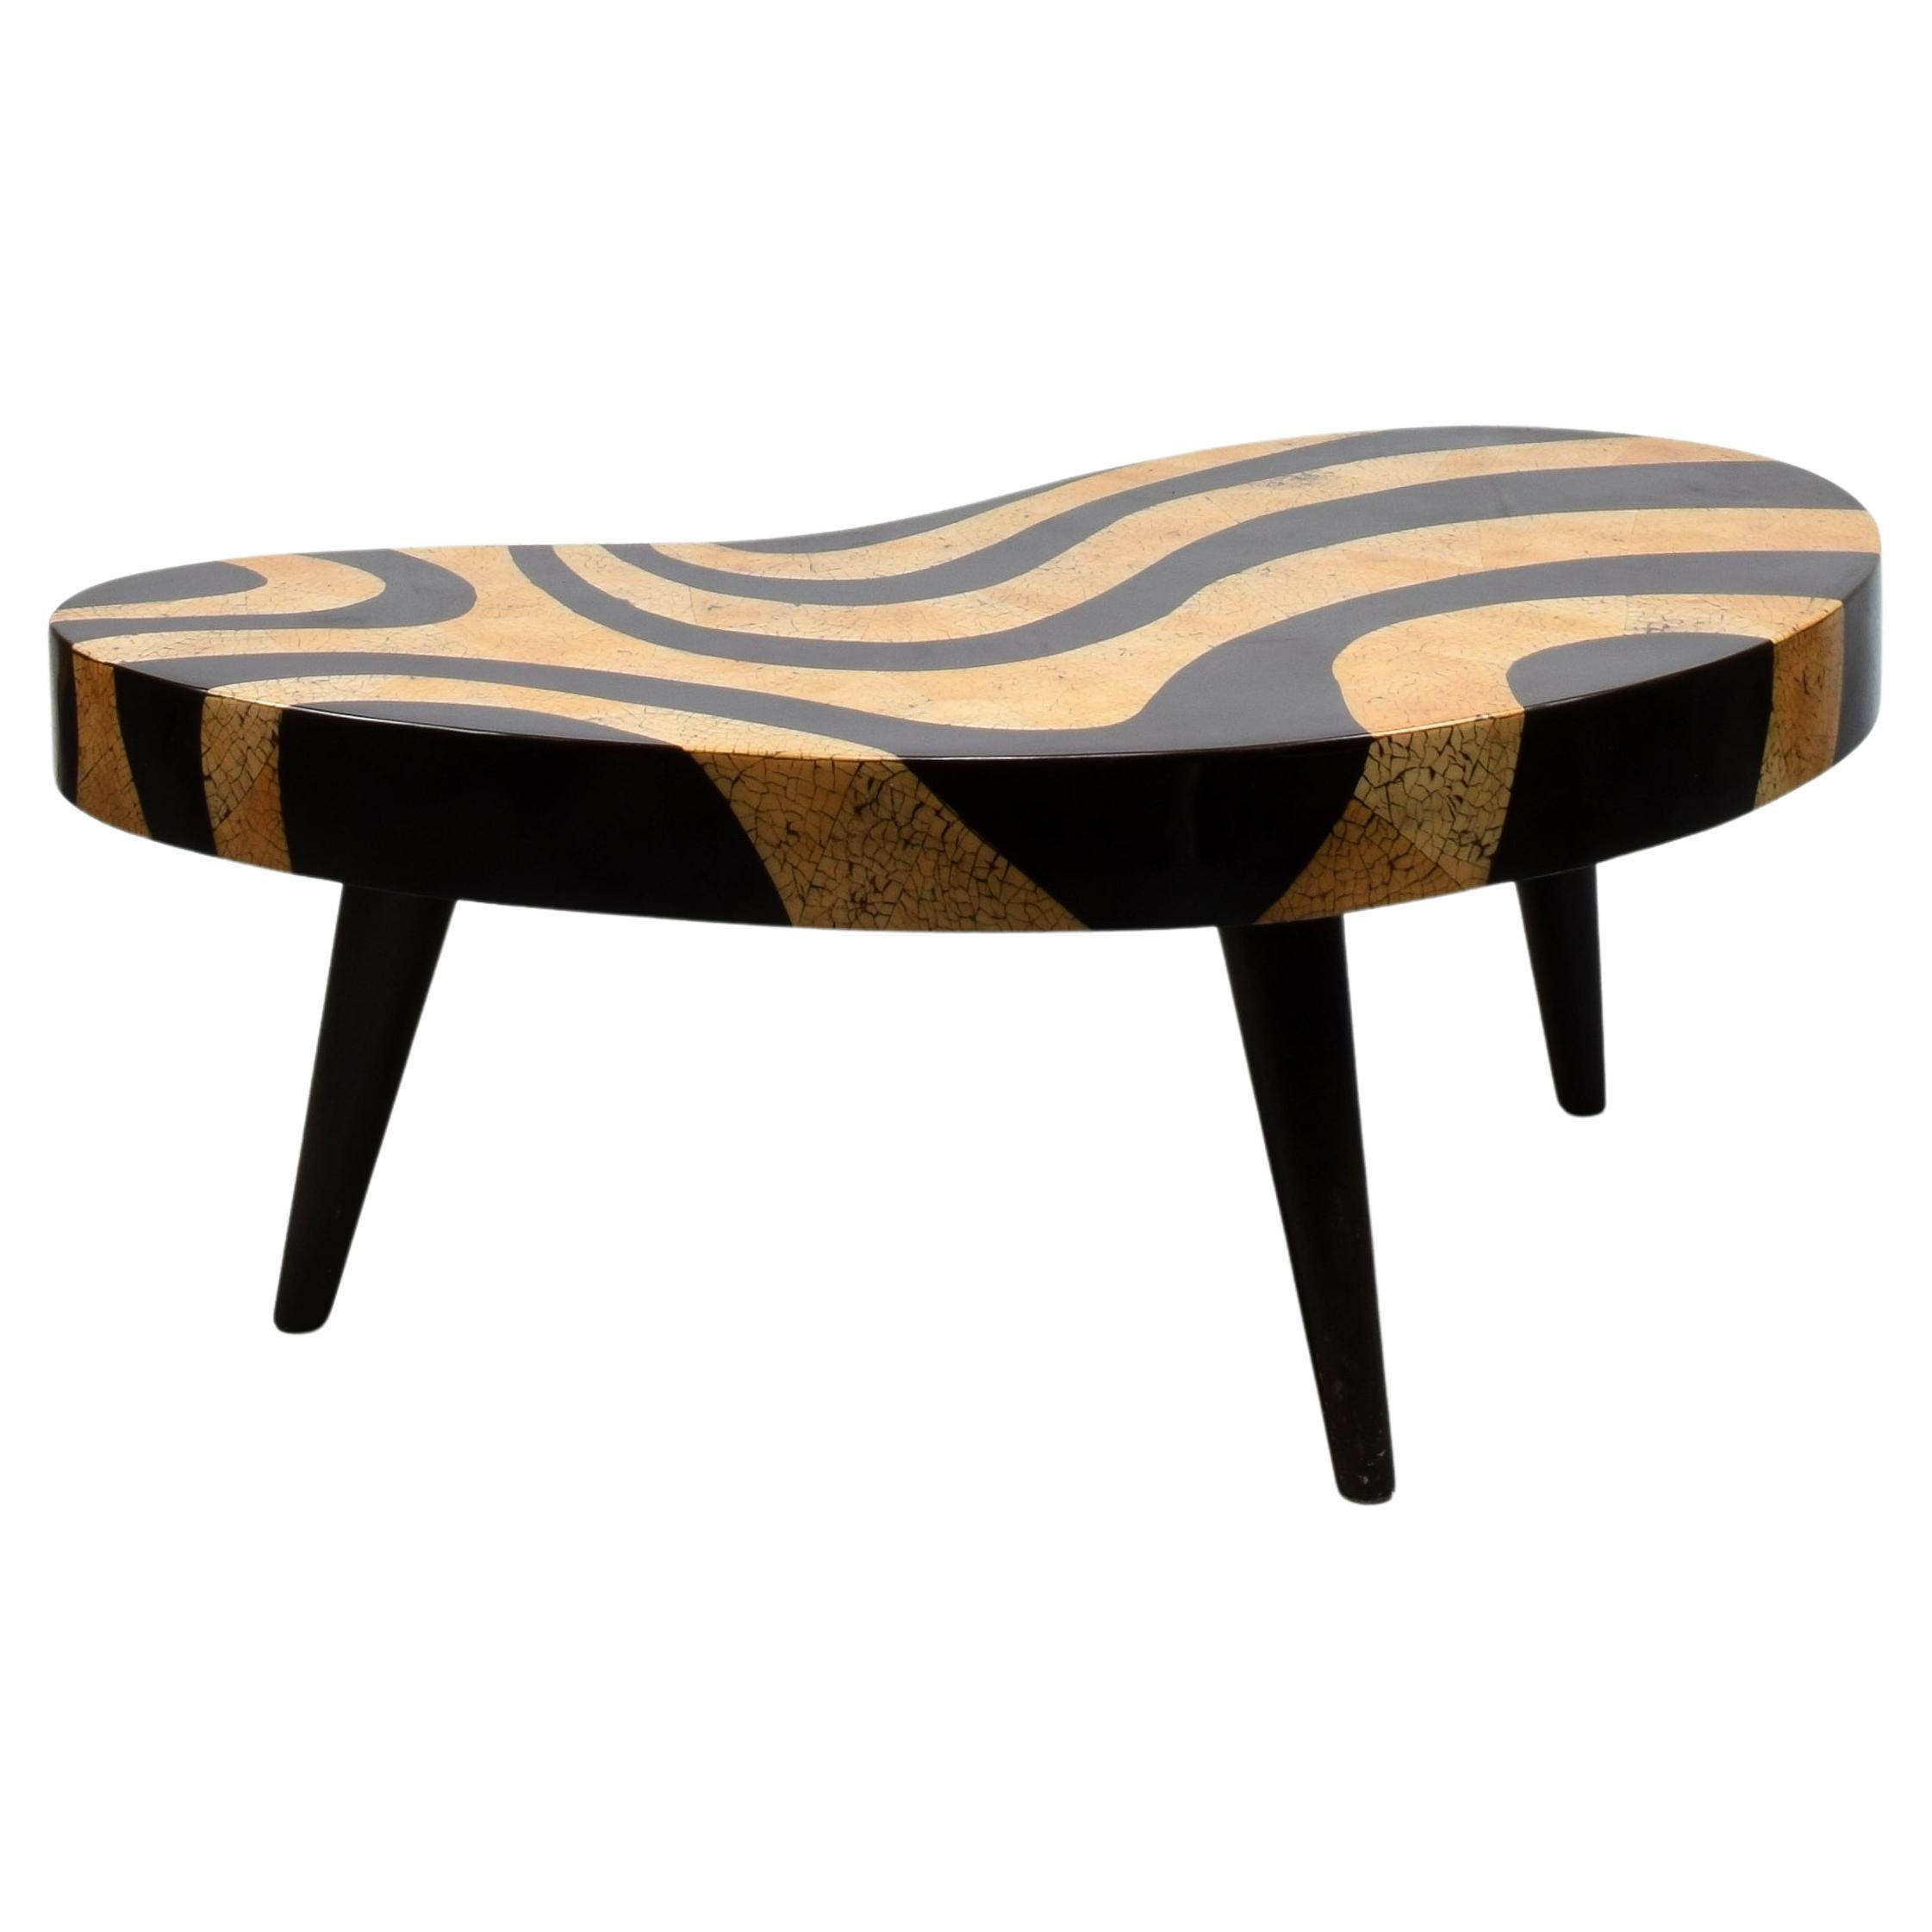 Biomorphic kidney-shaped coffee table with faux eggshell lacquer mosaic pattern For Sale